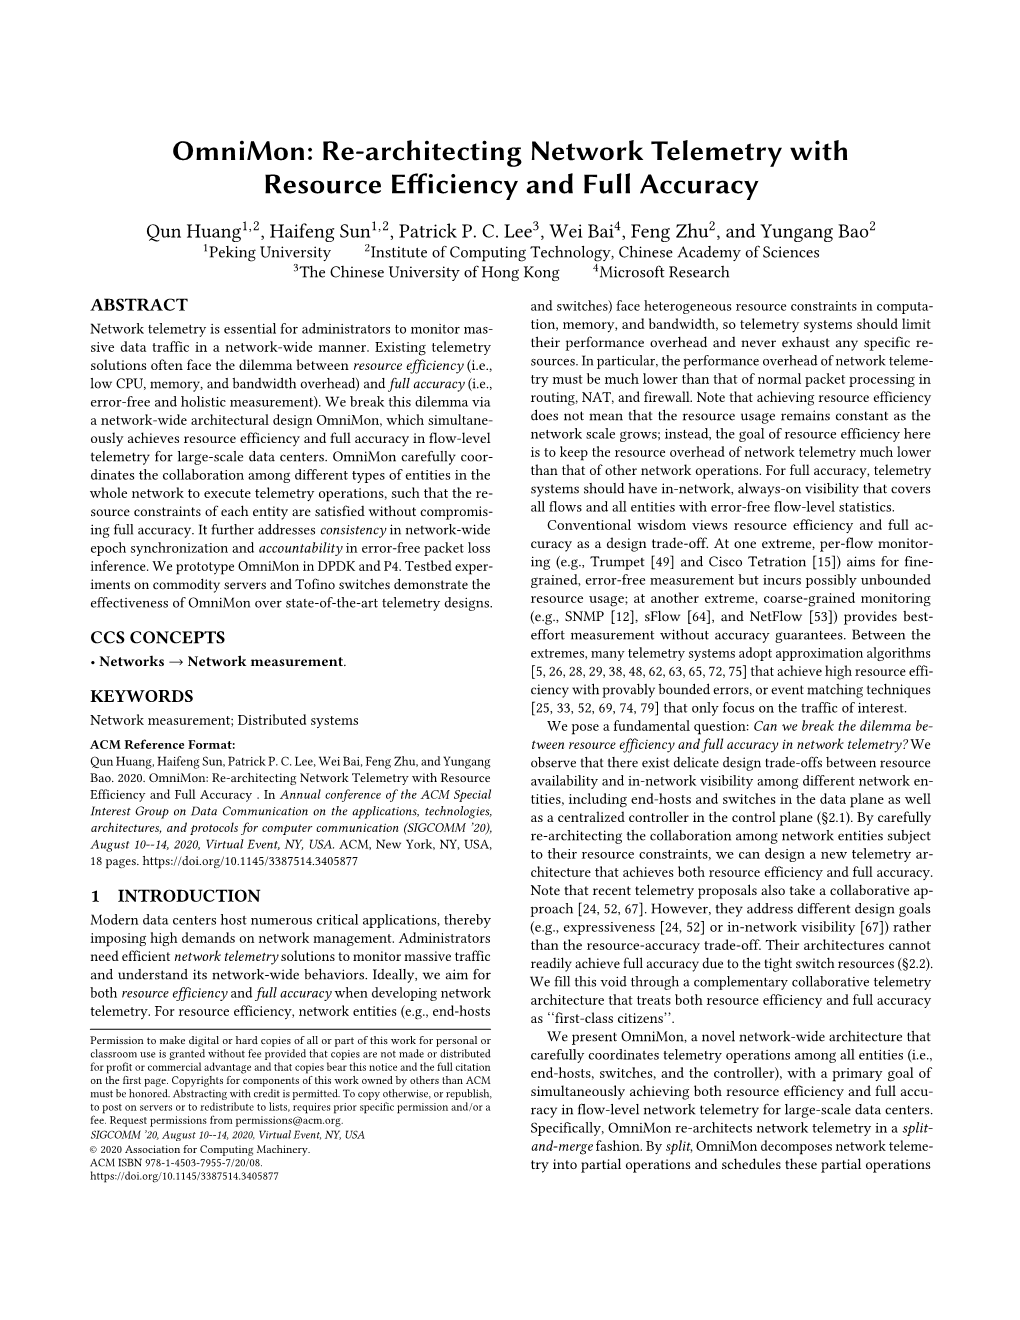 Re-Architecting Network Telemetry with Resource Efficiency and Full Accuracy